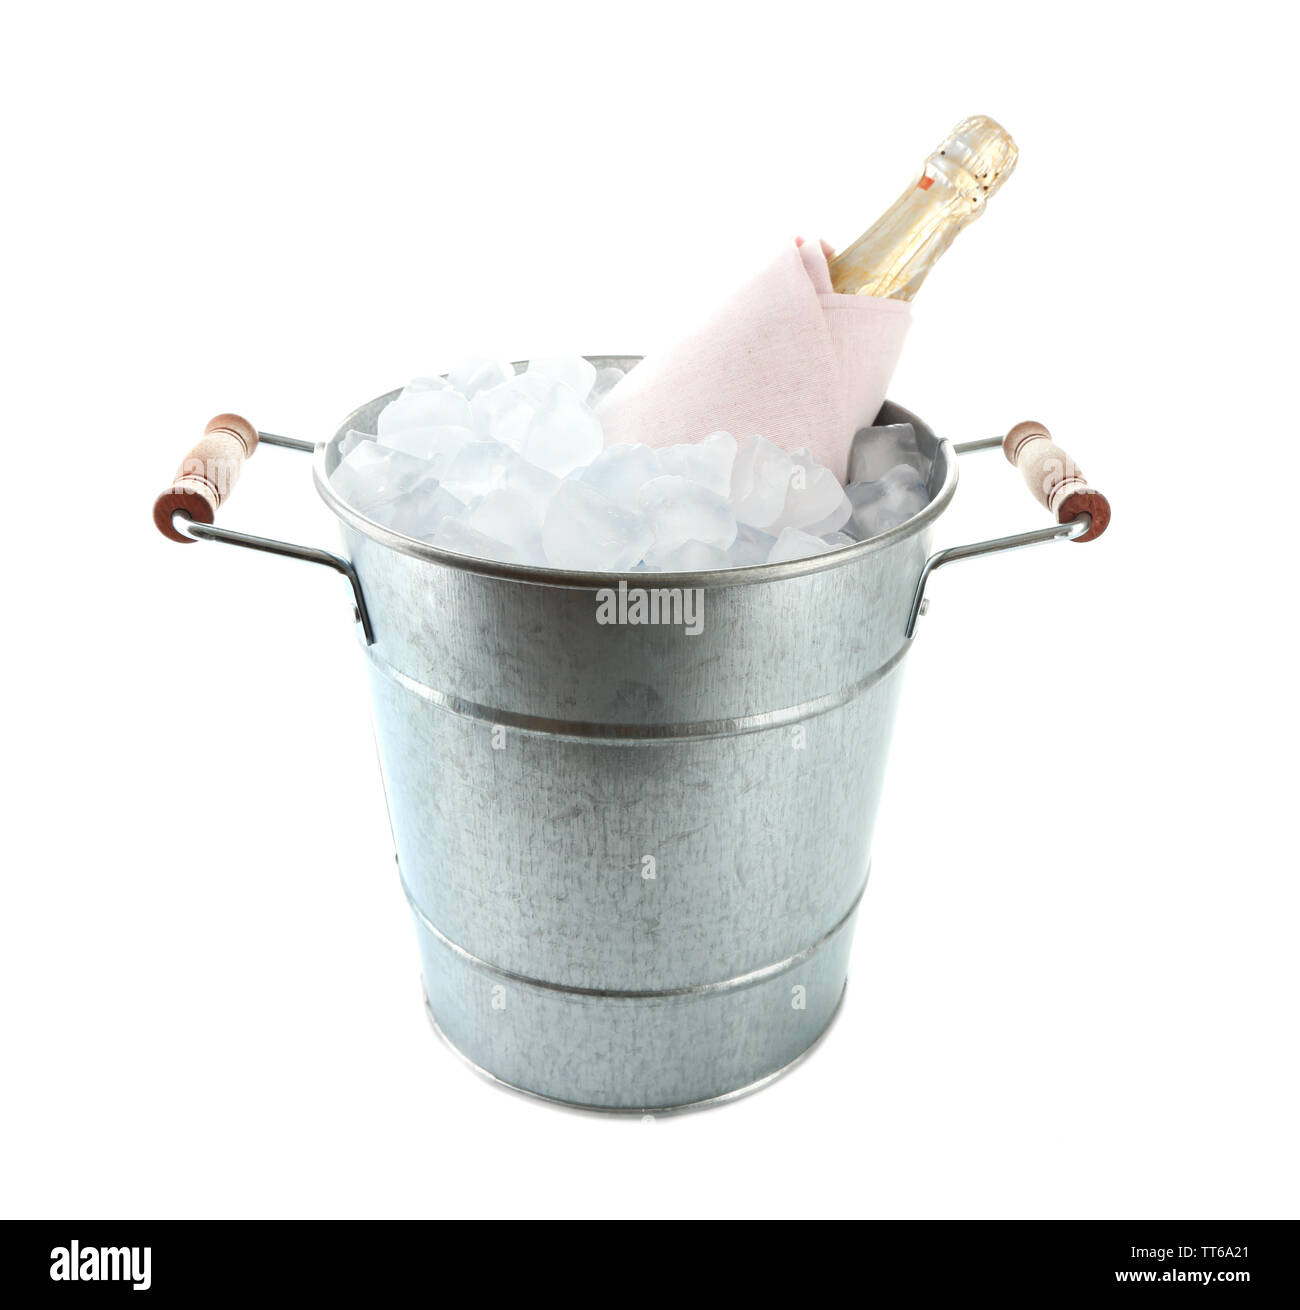 Bottle of champagne in metal ice bucket isolated on white Stock Photo